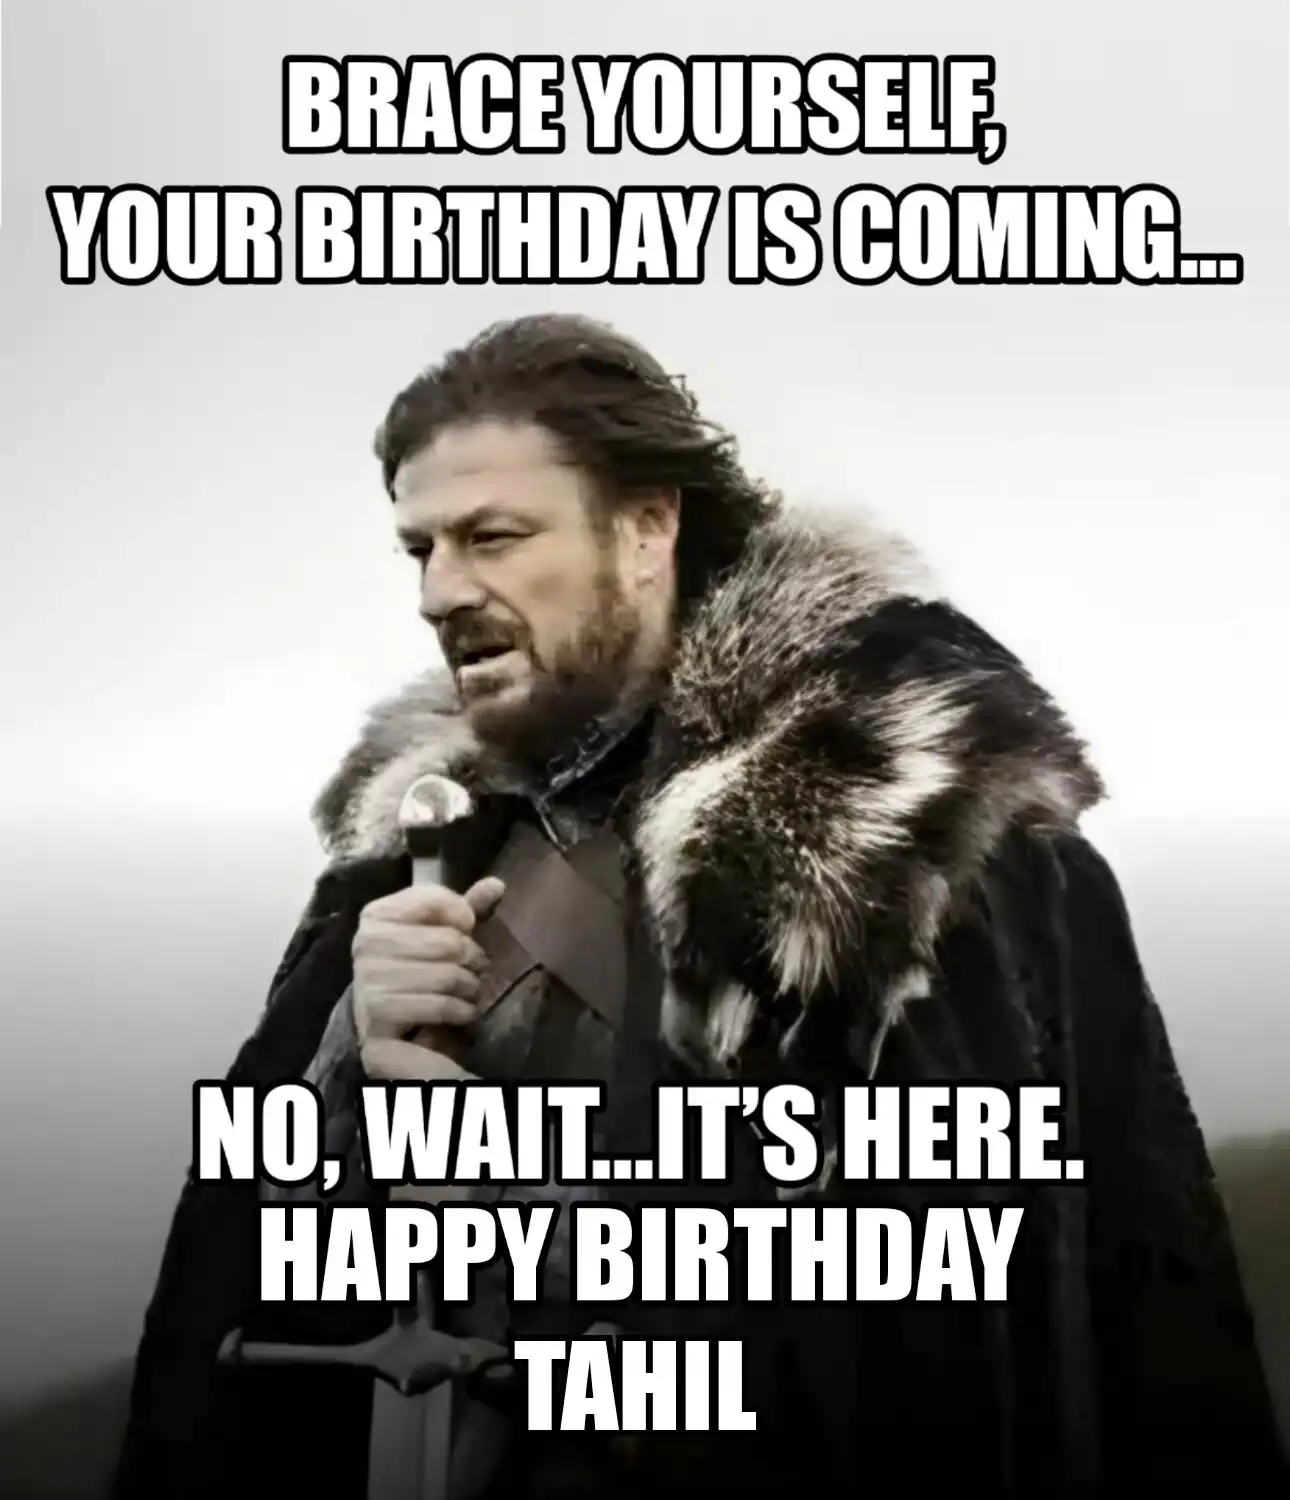 Happy Birthday Tahil Brace Yourself Your Birthday Is Coming Meme